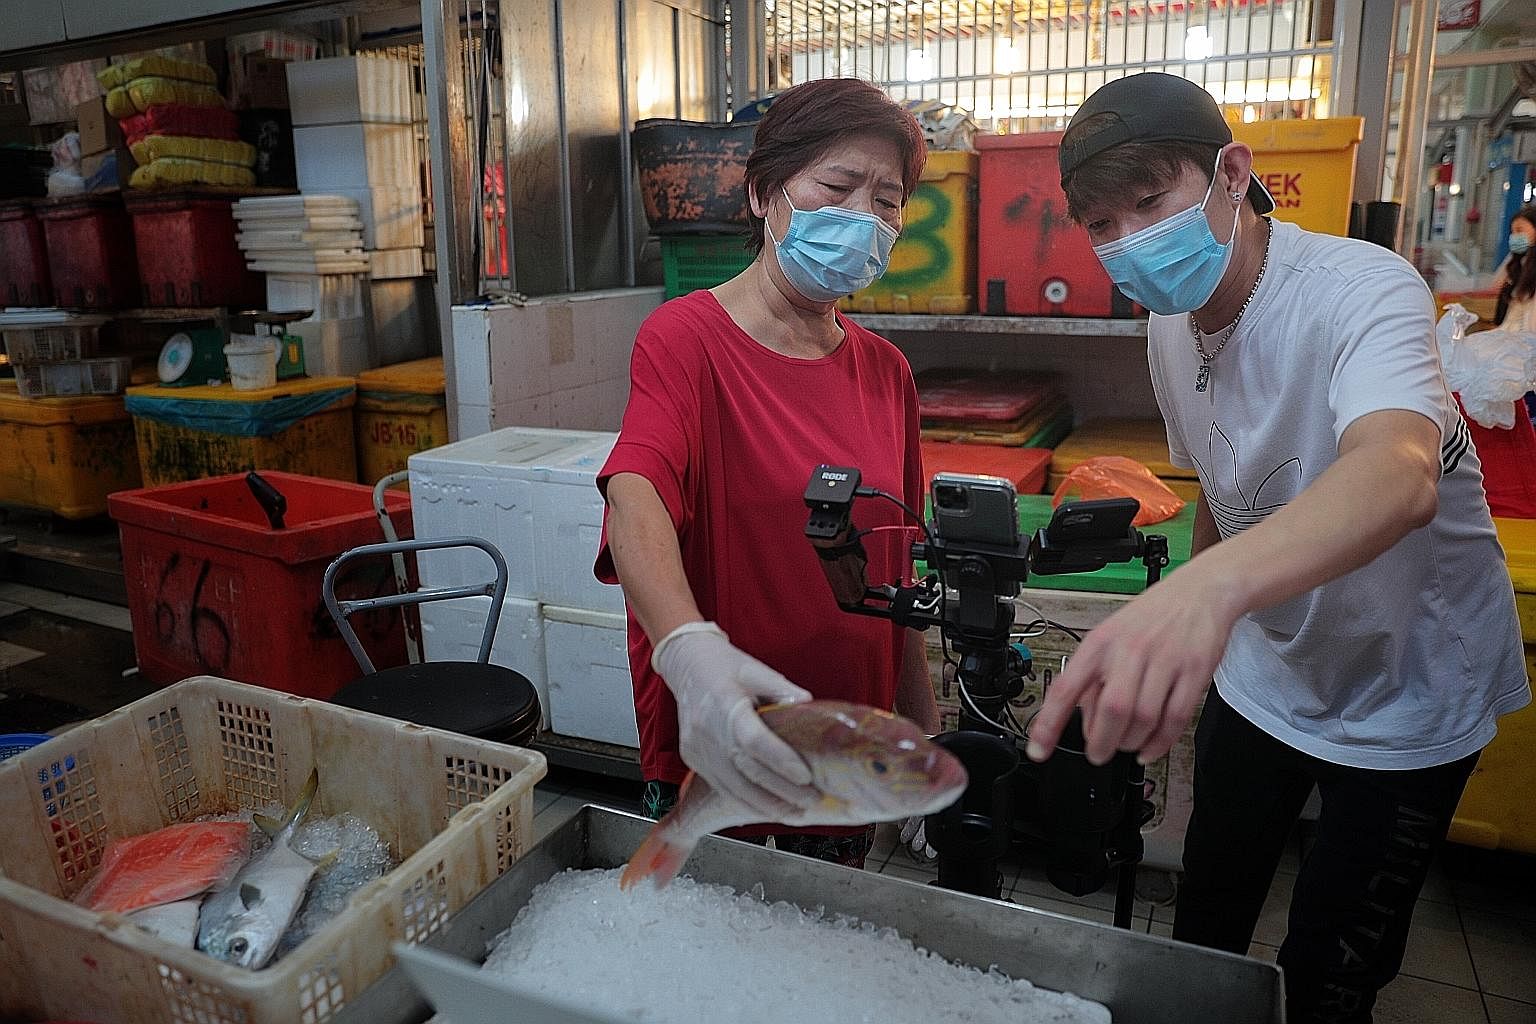 Ms Janet Tiou, 68, of the 81 Sheng Yu stall at Tekka Market received some tips on selling her seafood on a livestream yesterday from Mr Max Kee, 37, of Lian Huat Seafood. Yesterday was the first day of a new initiative to take the wet market shopping